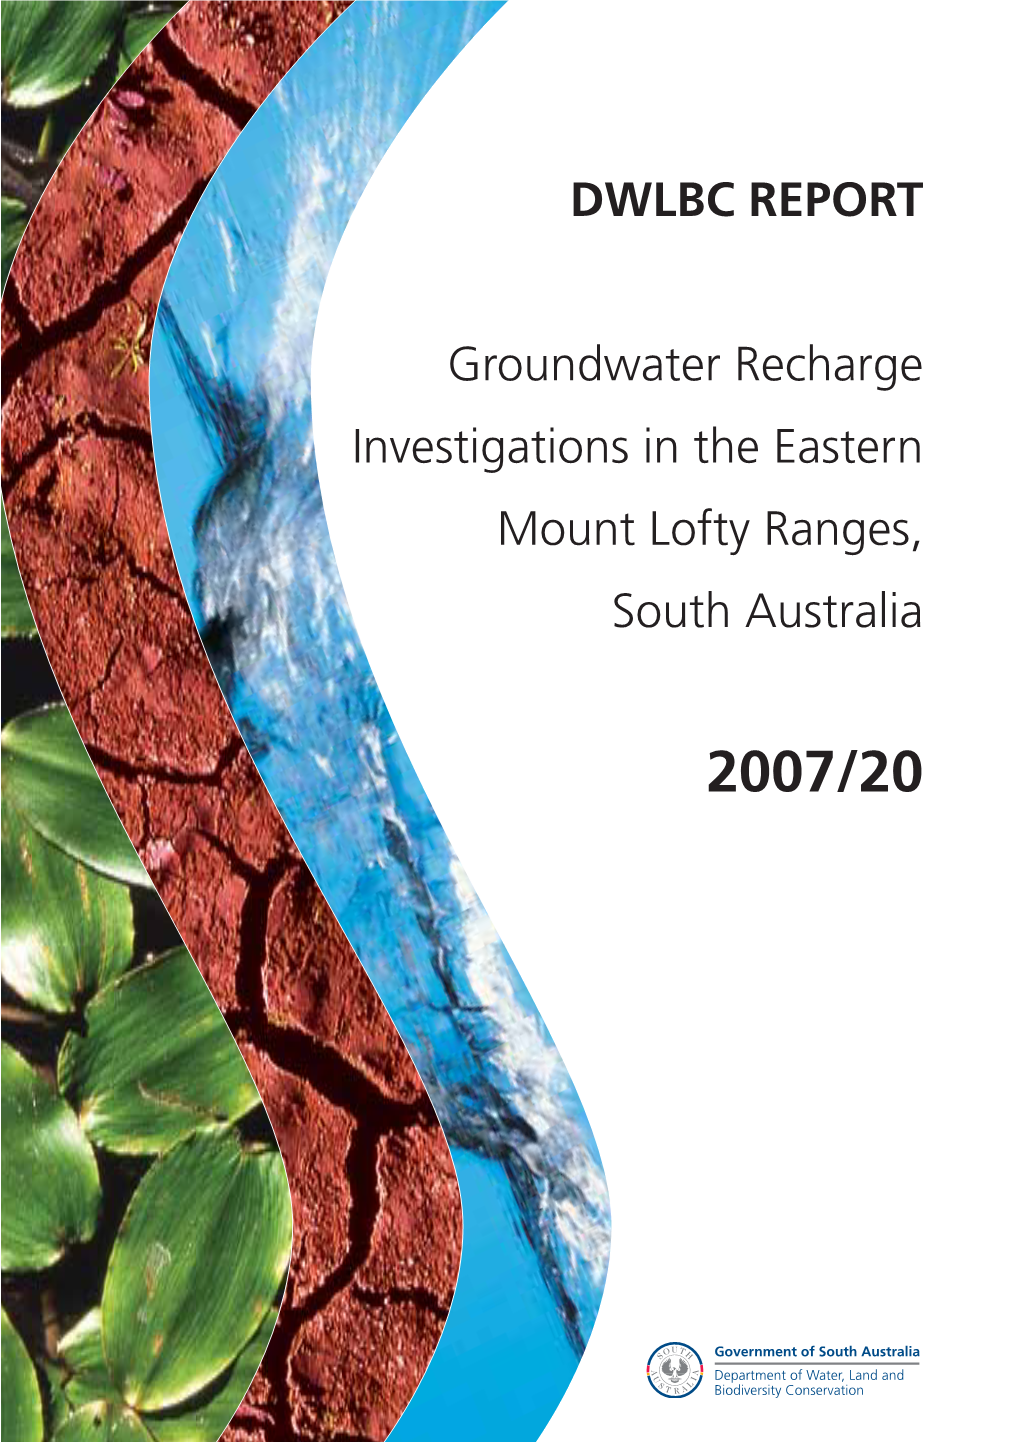 Groundwater Recharge Investigations in the Eastern Mount Lofty Ranges, South Australia